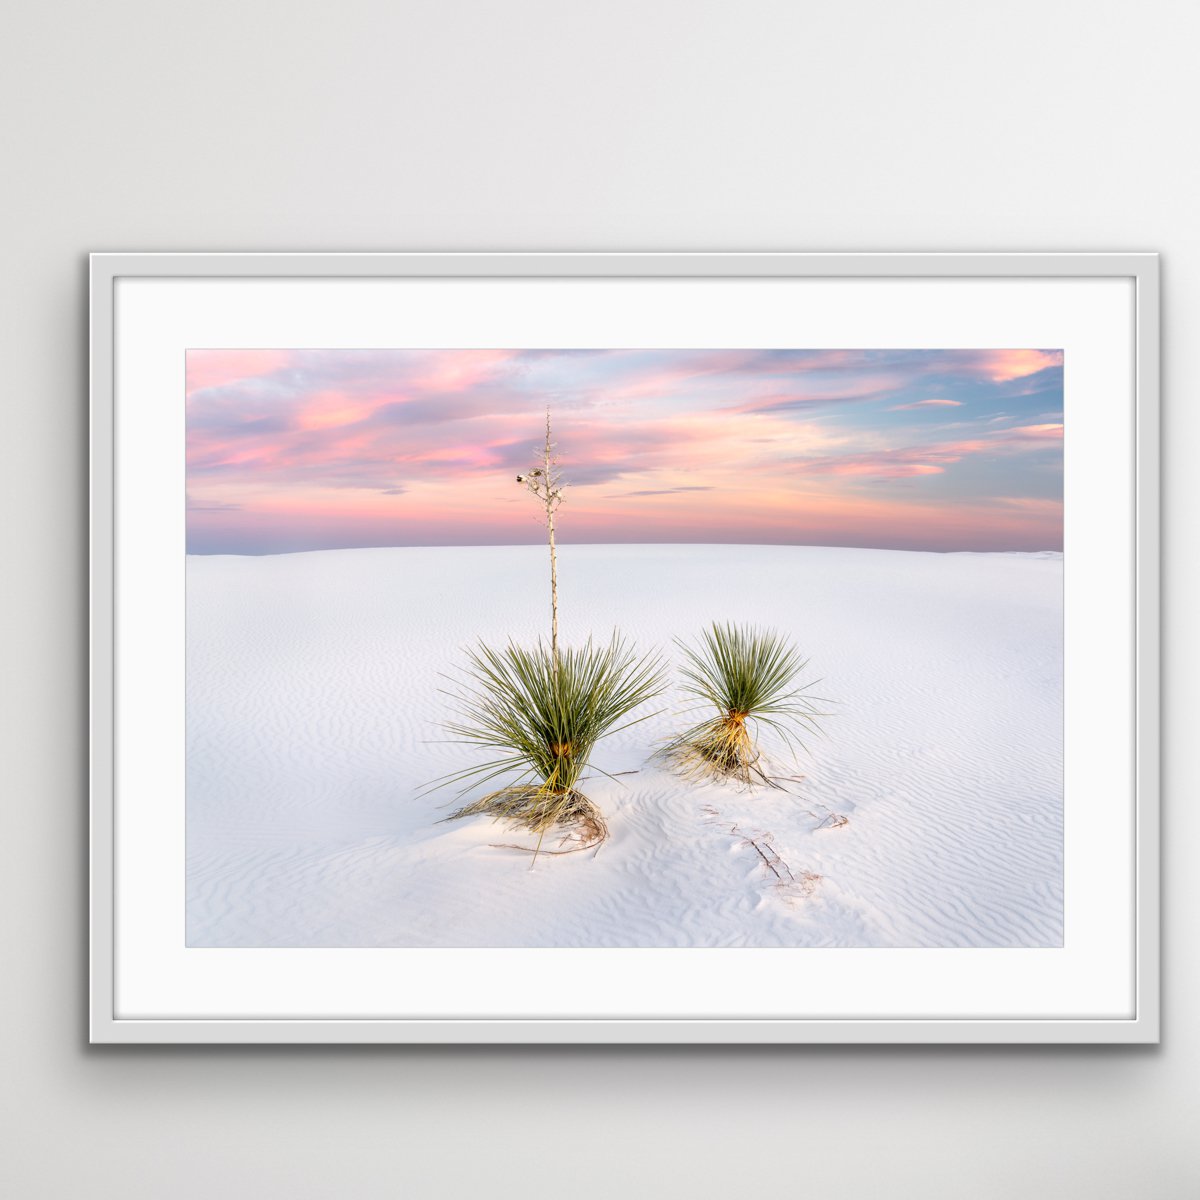 Yucca, White Sands - FRAMED - Limited Edition by Francesco Carucci